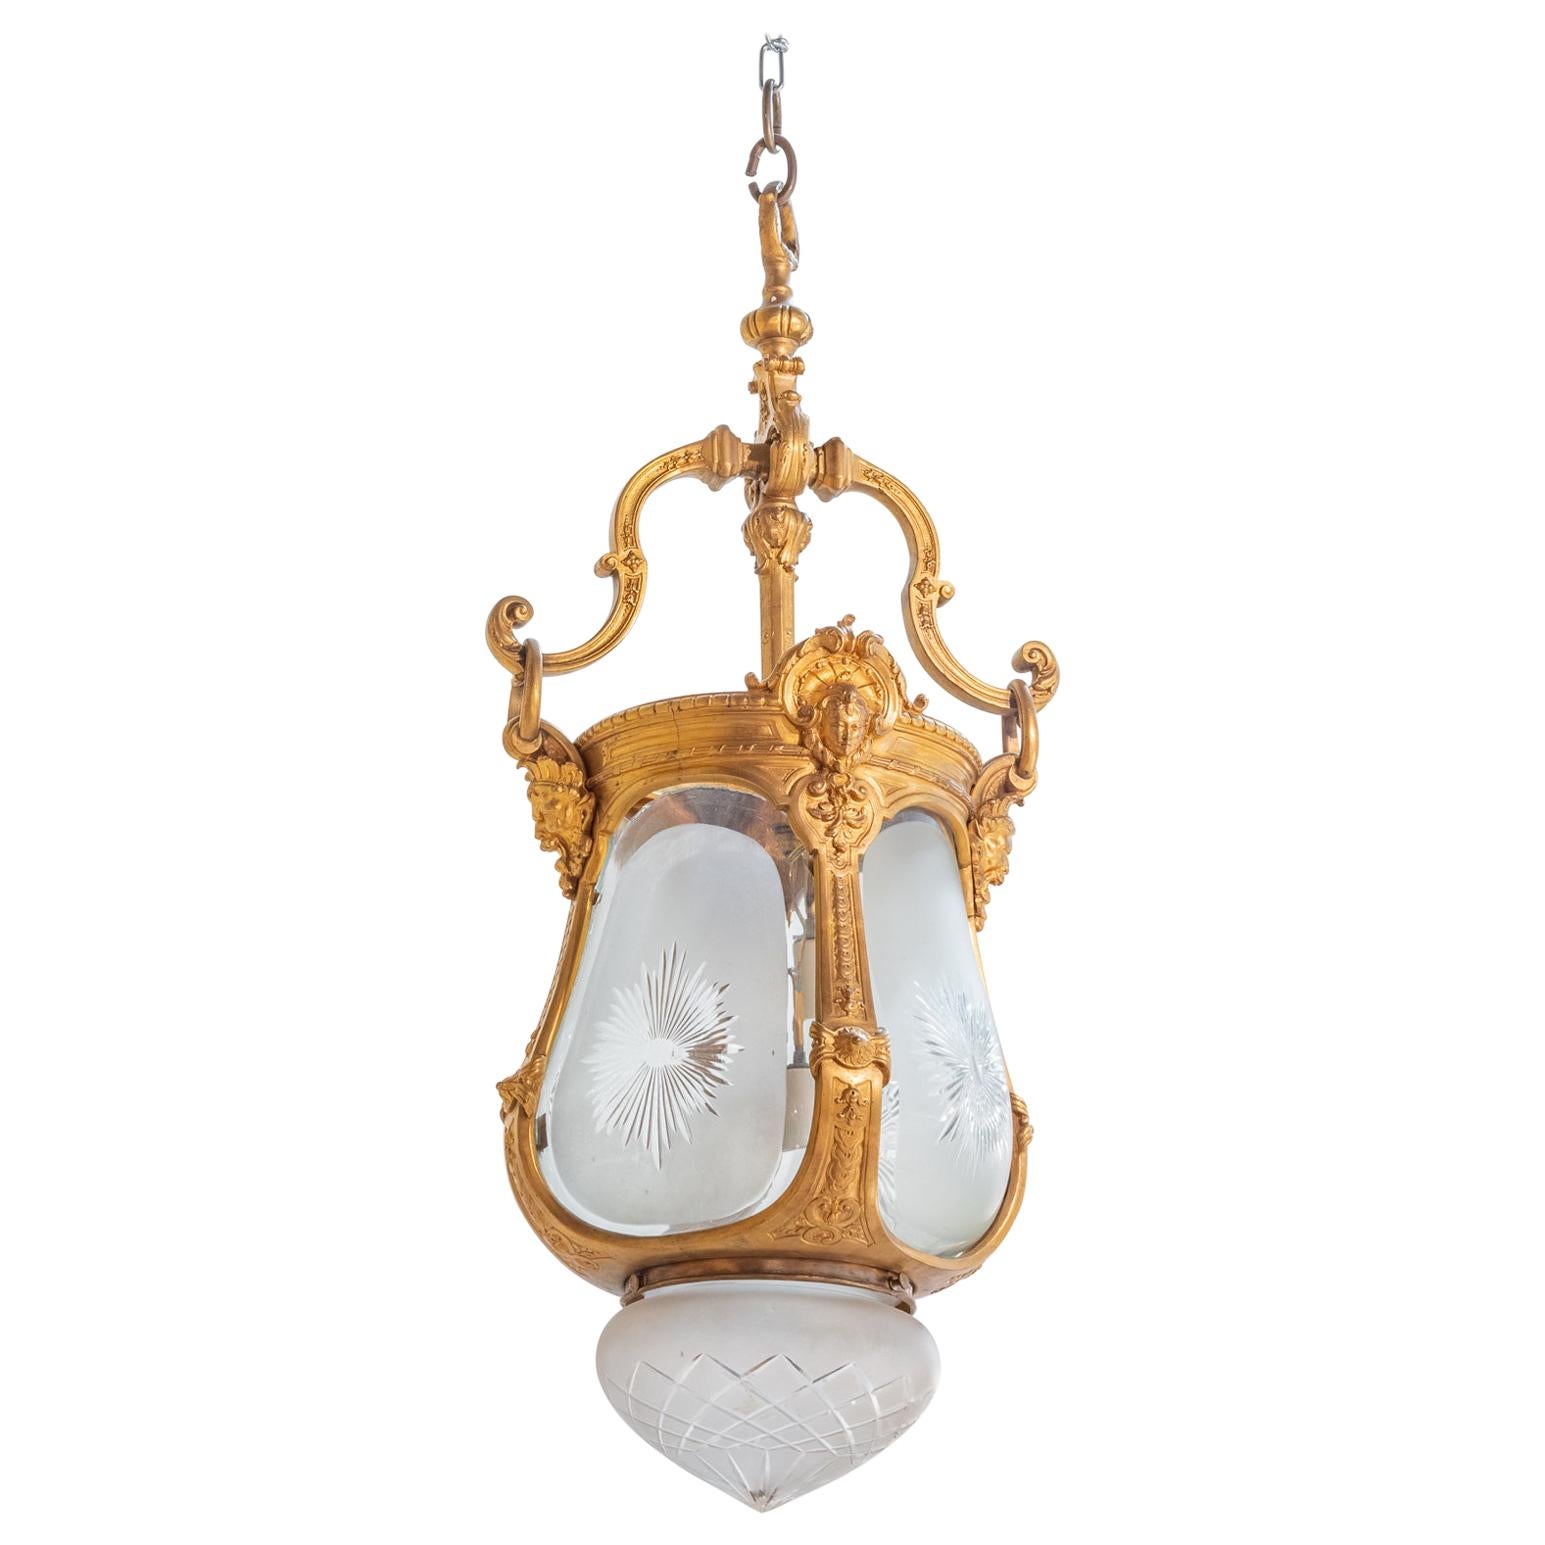 Fine and Beautiful 19th Century French Cut Crystal Gilt Bronze Lantern For Sale